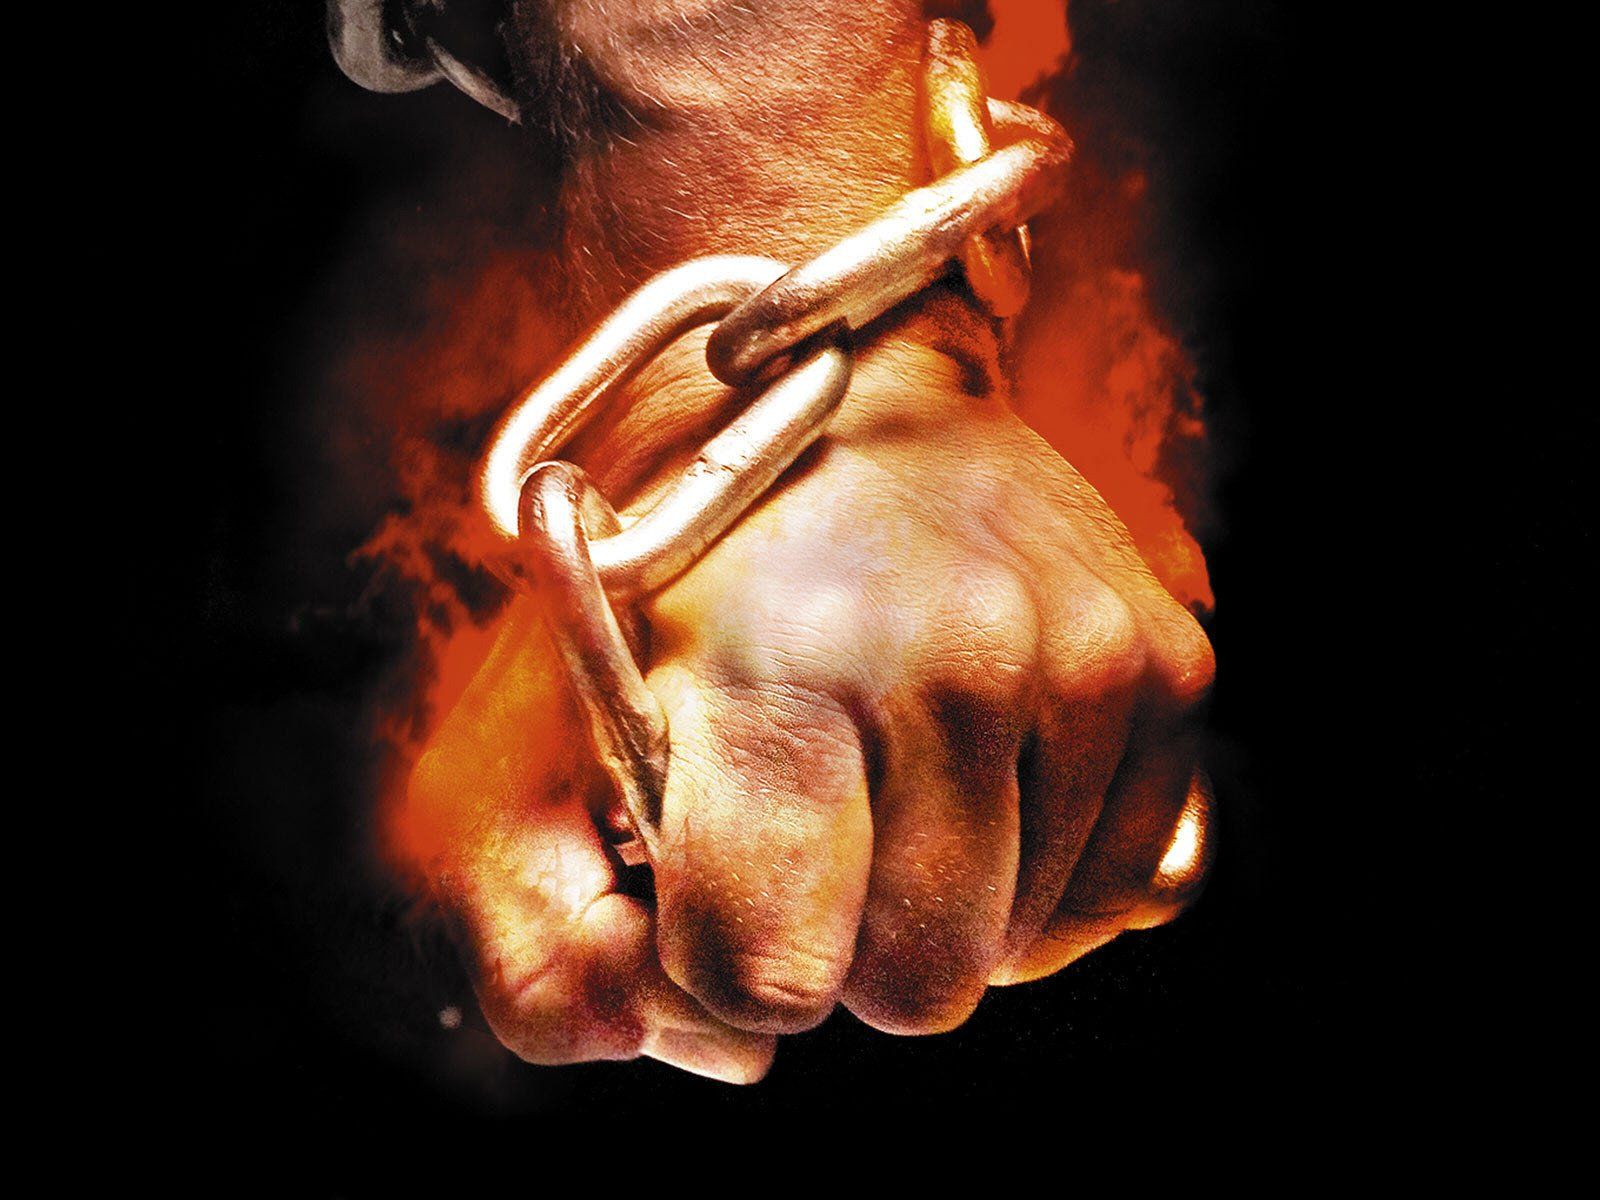 Styles hand arts flame chain fist black fire wallpaperx1200